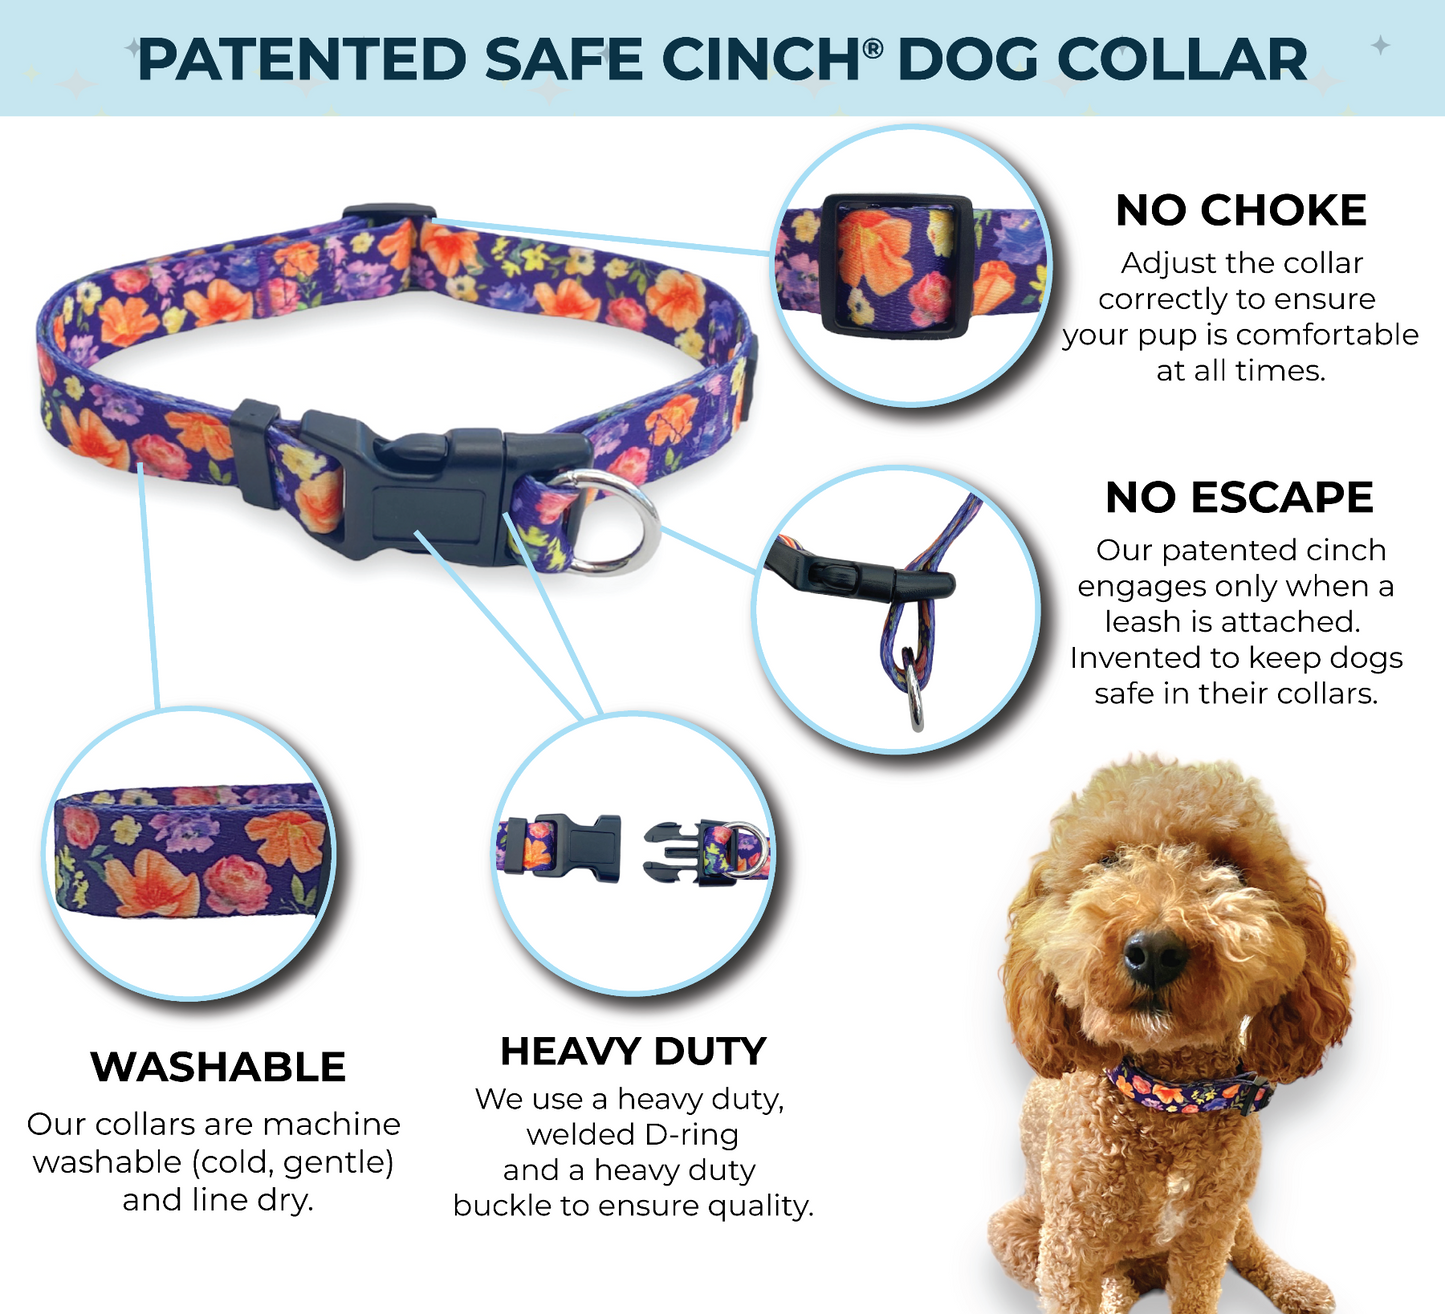 an infographic of a safe cinch collar by fearless pet showing its features an escape proof dog collar for all size dogs